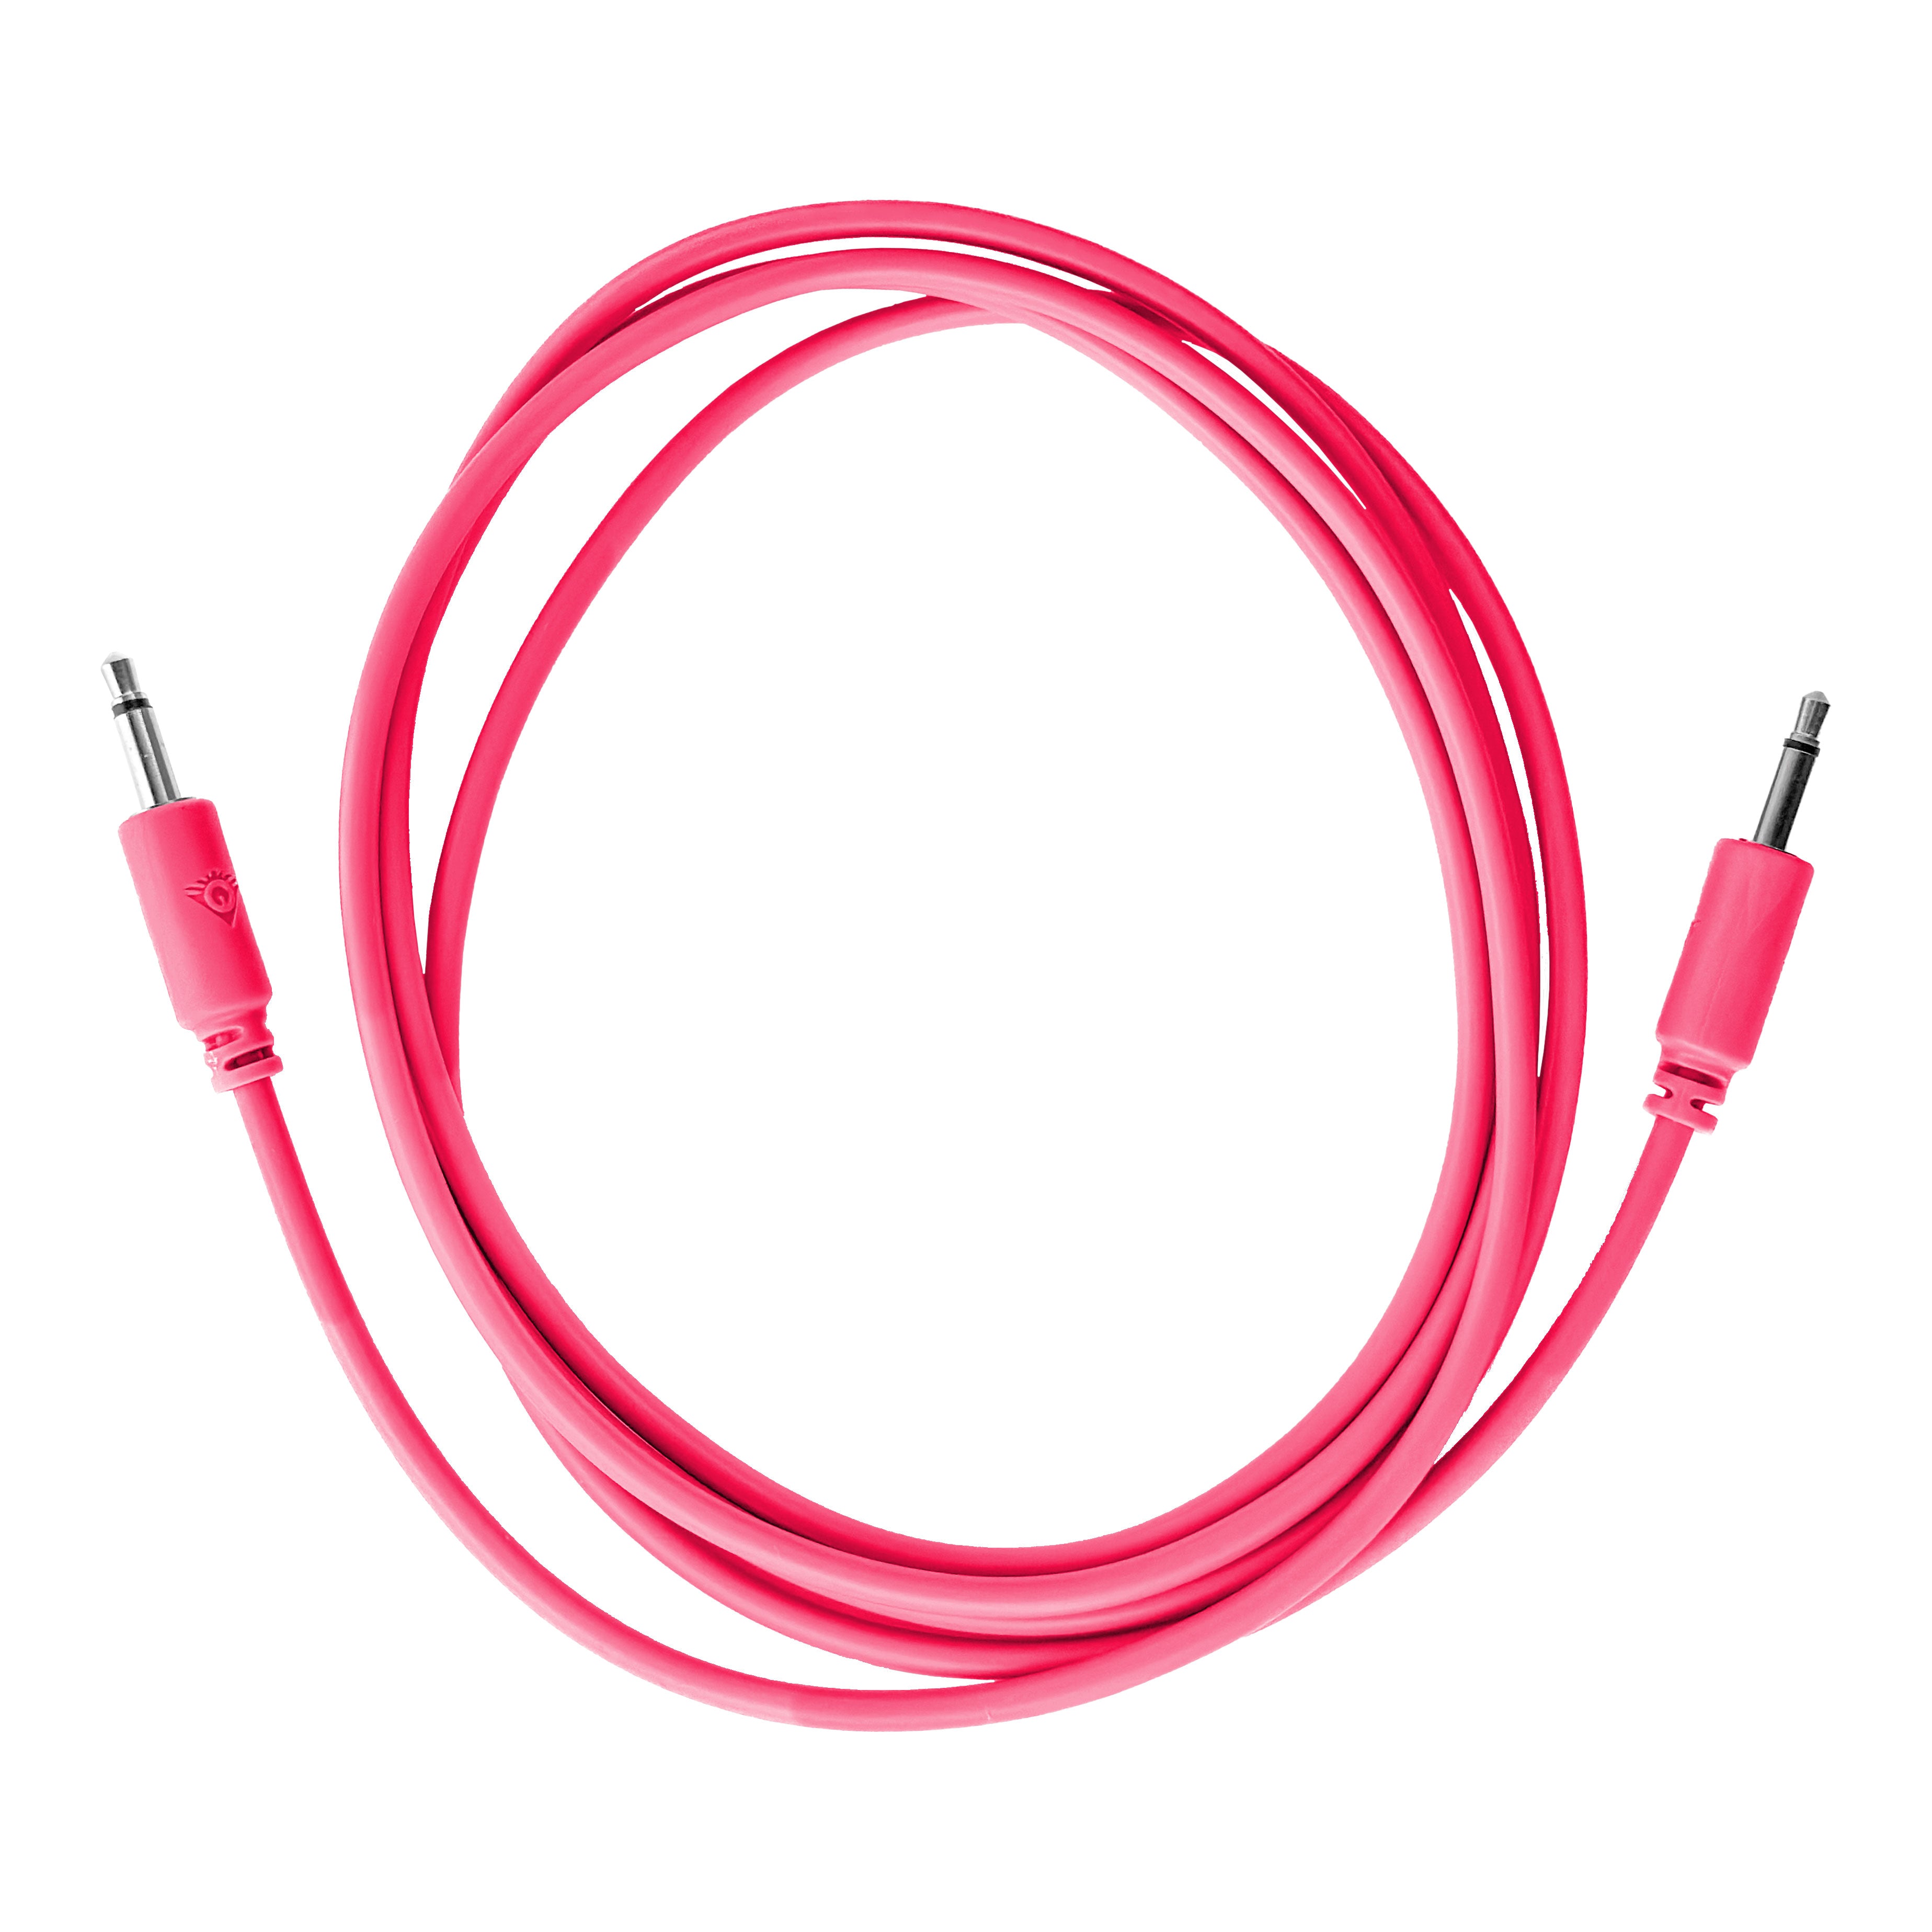 Black Market Modular 3.5mm Patch Cable - 150cm/60" - Pink View 1